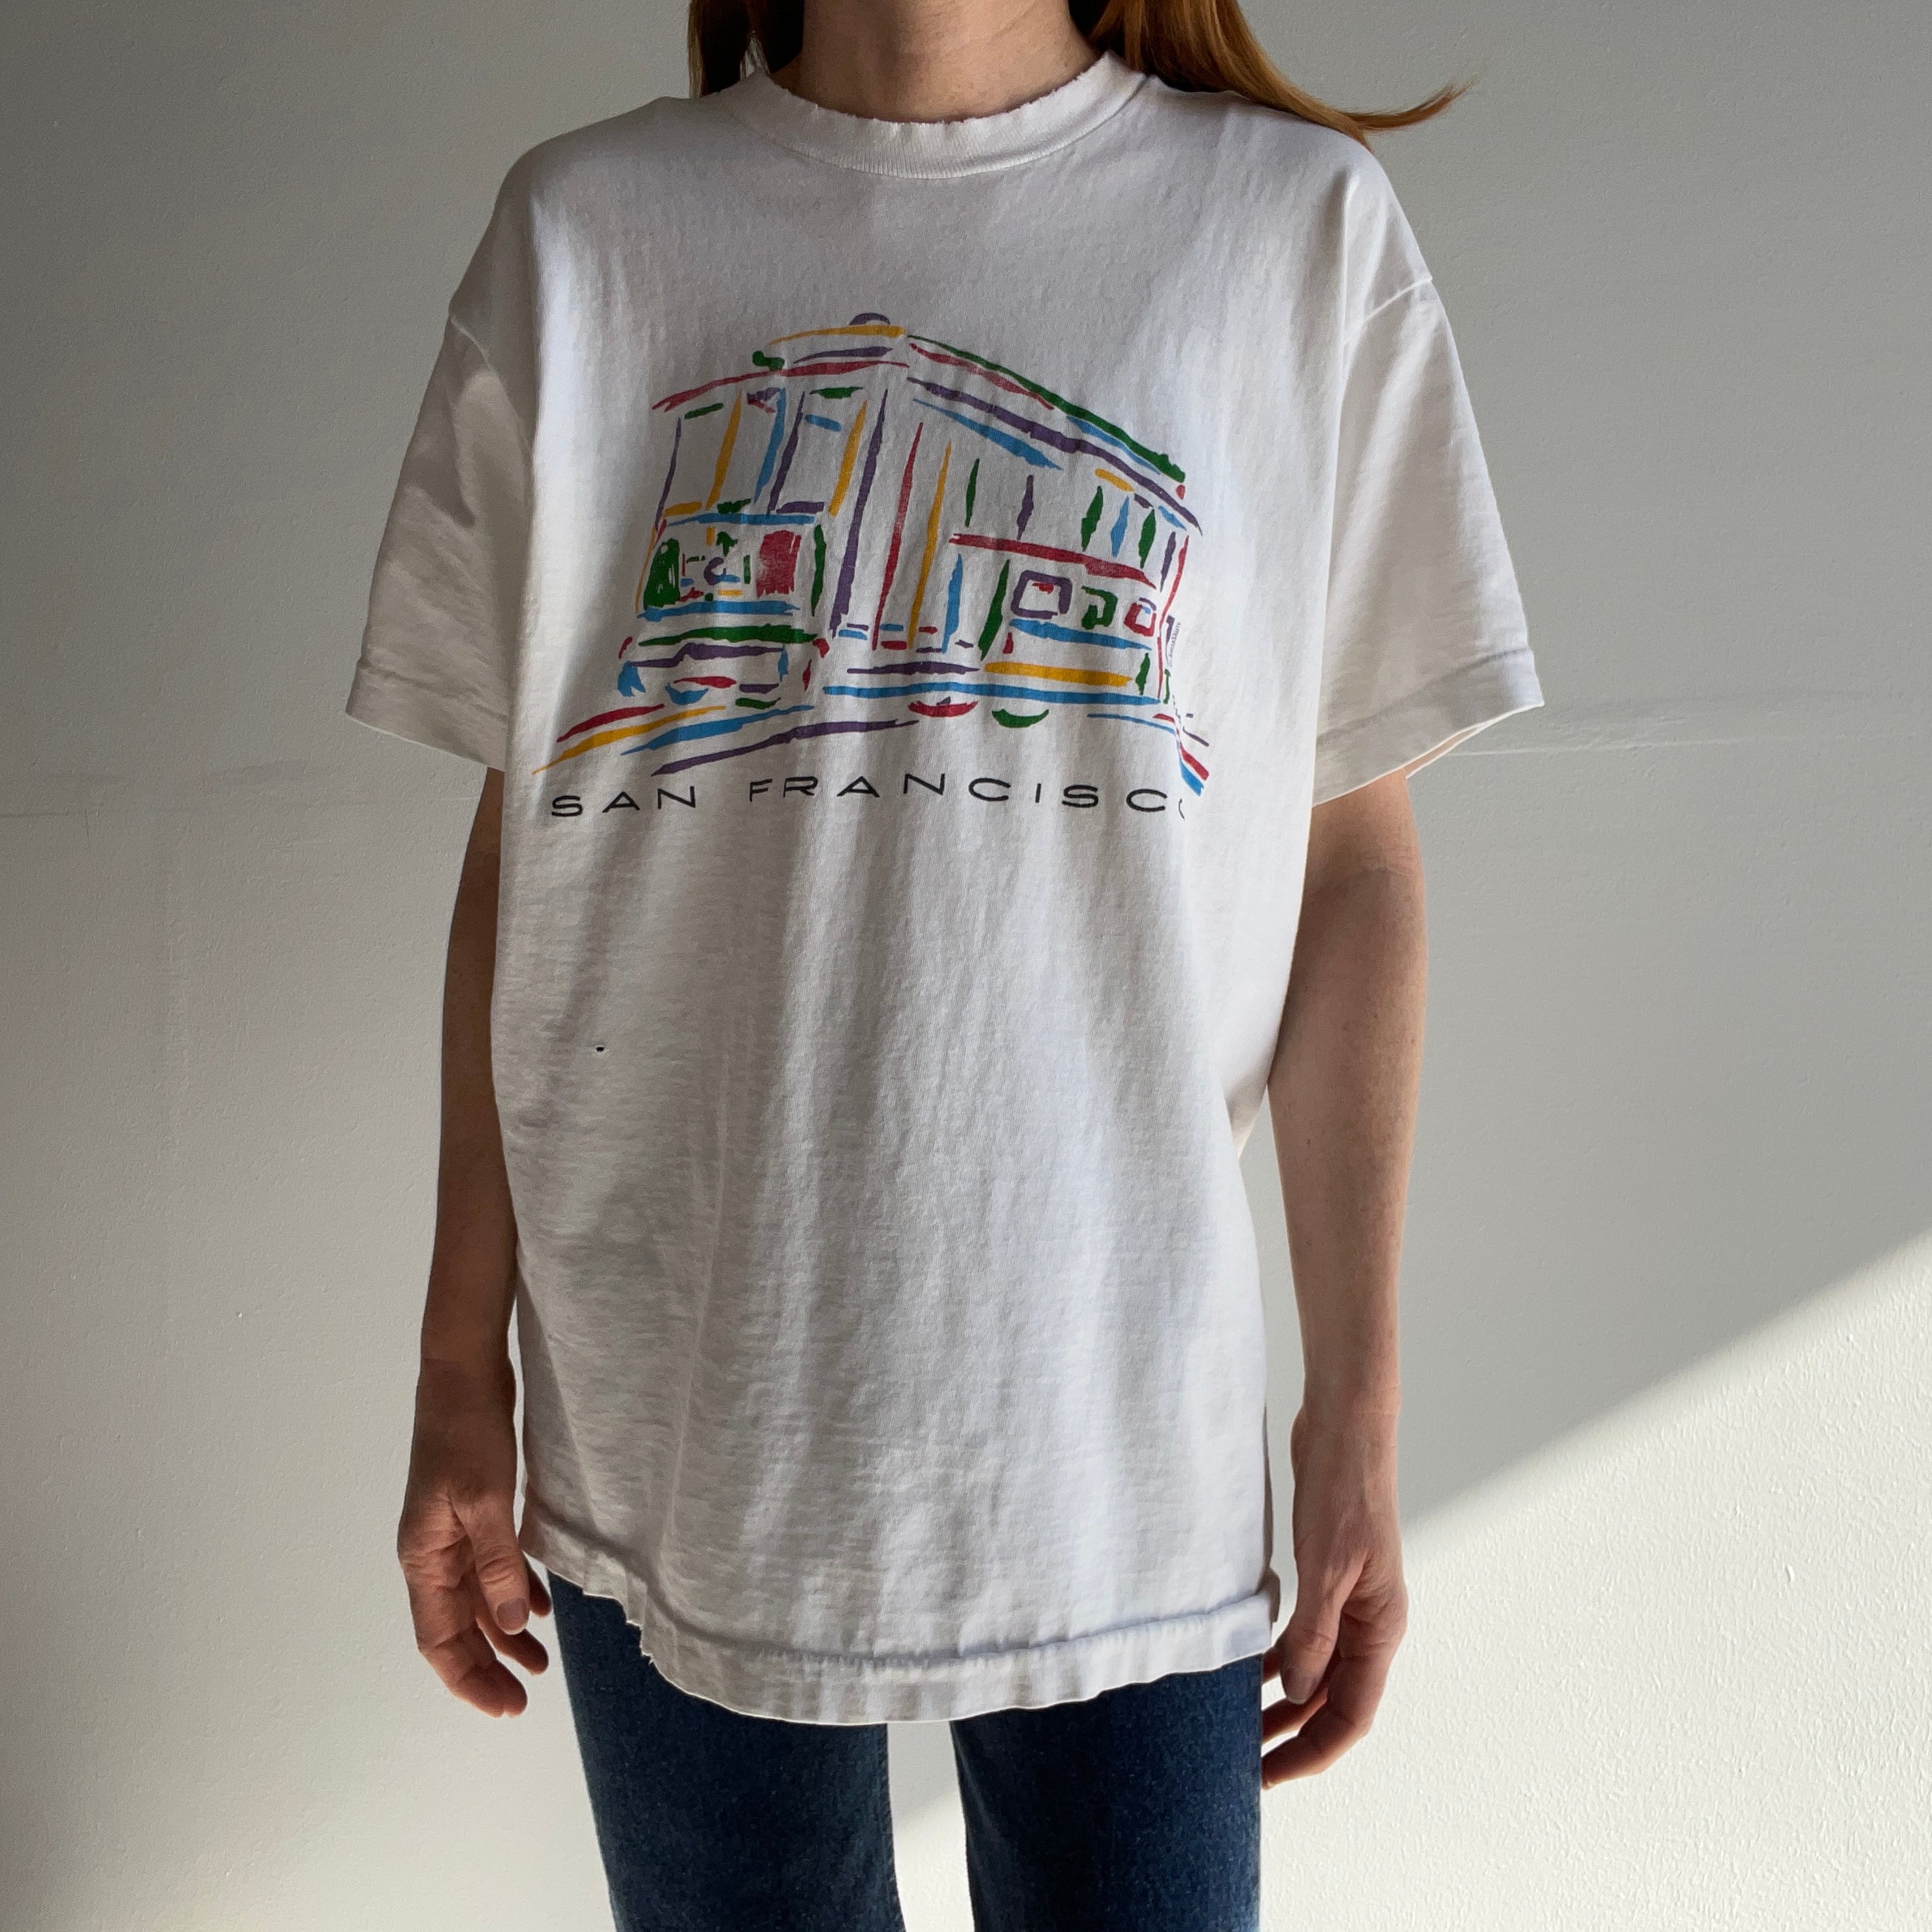 1980s Perfectly Tattered San Francisco Cotton T-Shirt